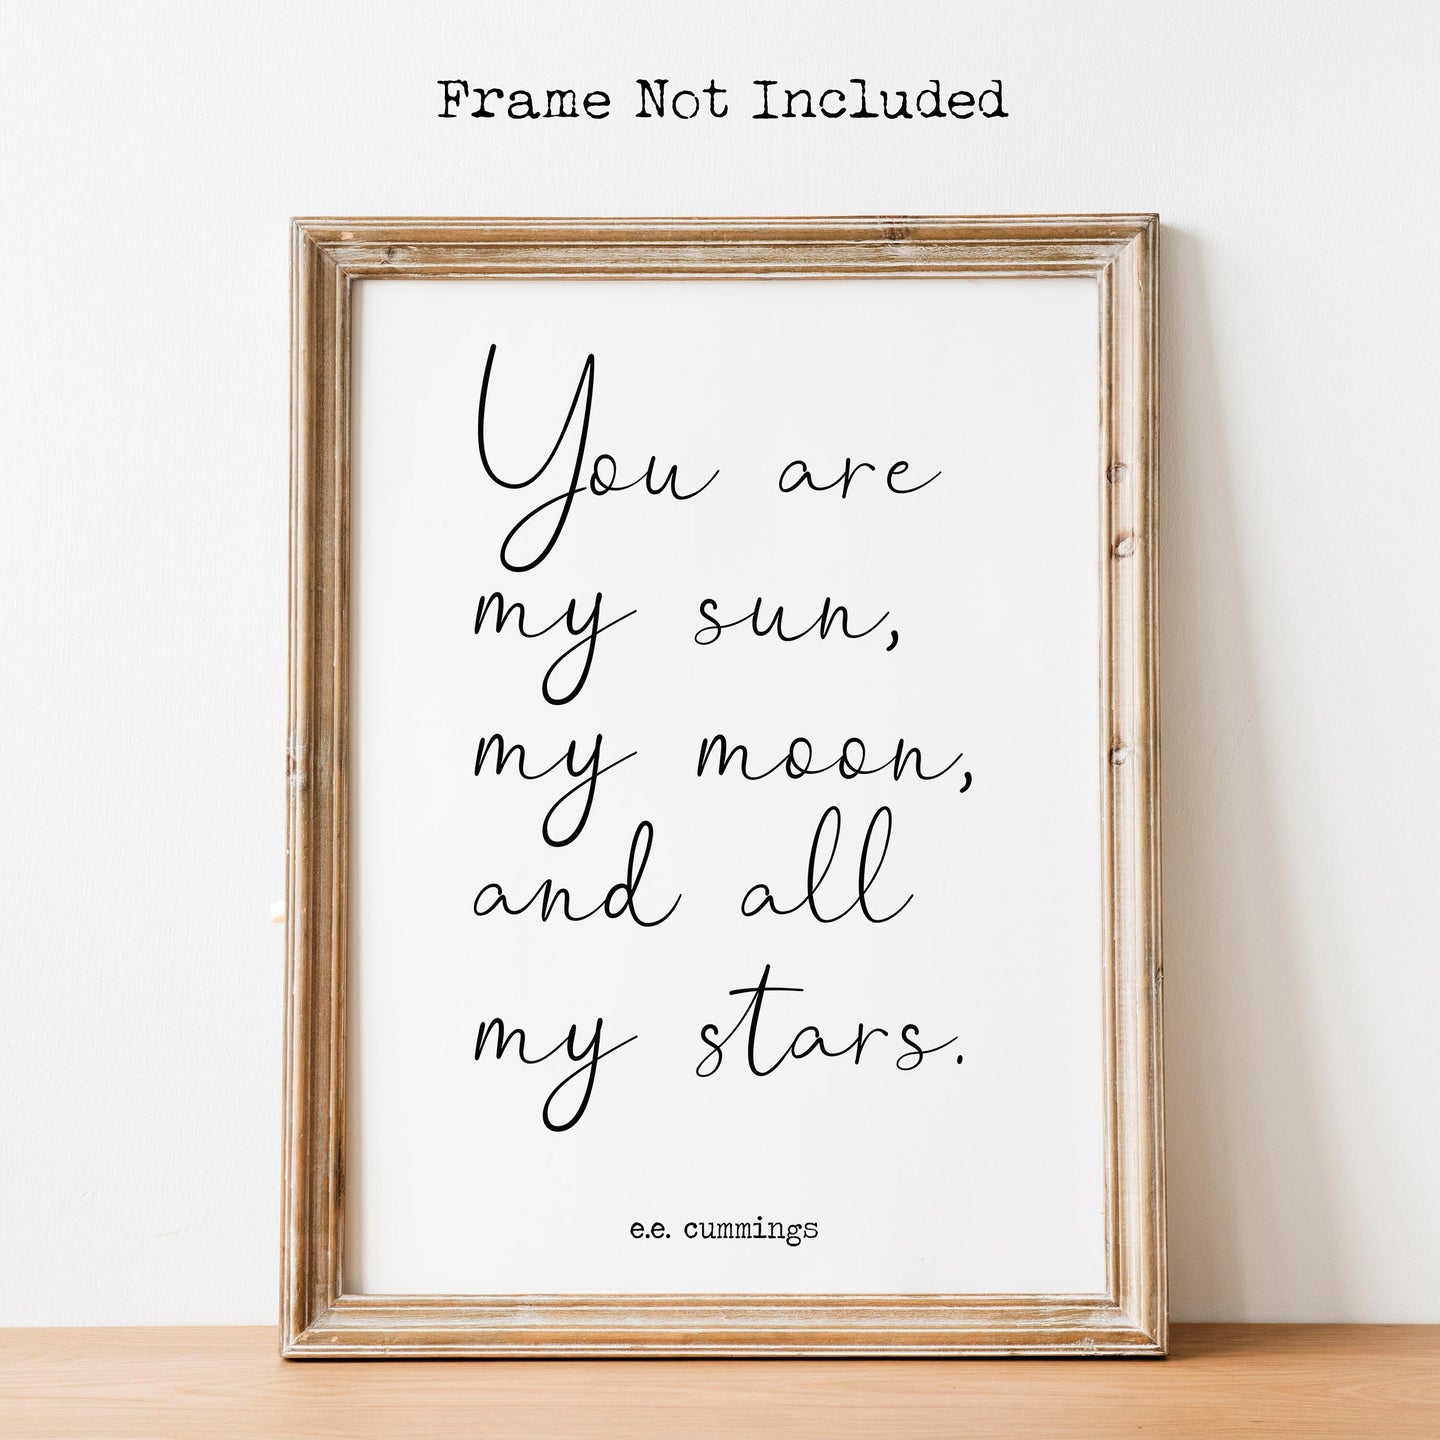 E.E. Cummings quote you are my sun, my moon, and all my stars Art Print Home Decor poetry wall art love quote home decor UNFRAMED